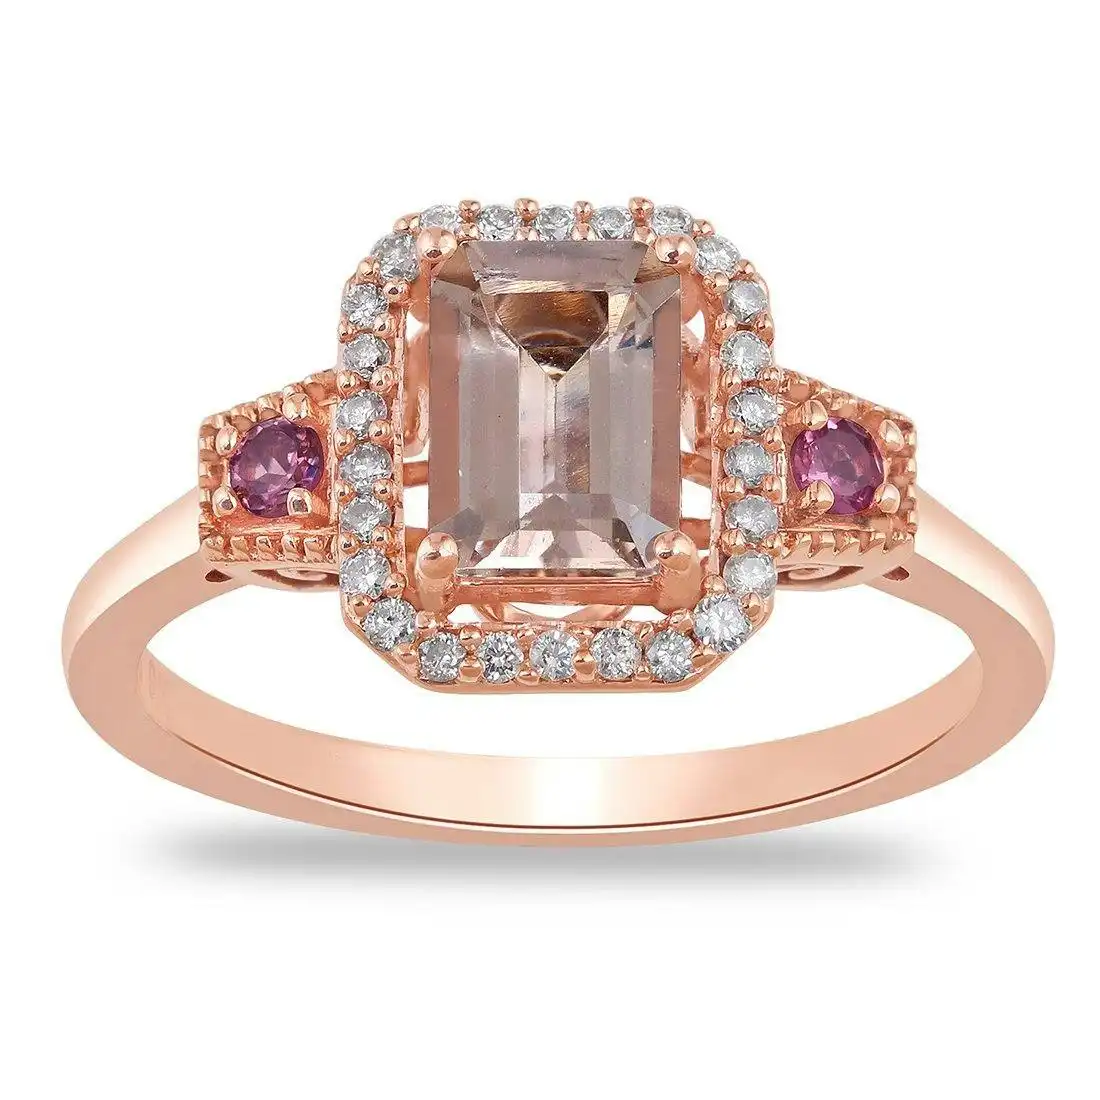 Morganite and Tourmaline Ring with 0.10ct of Diamonds in 9ct Rose Gold